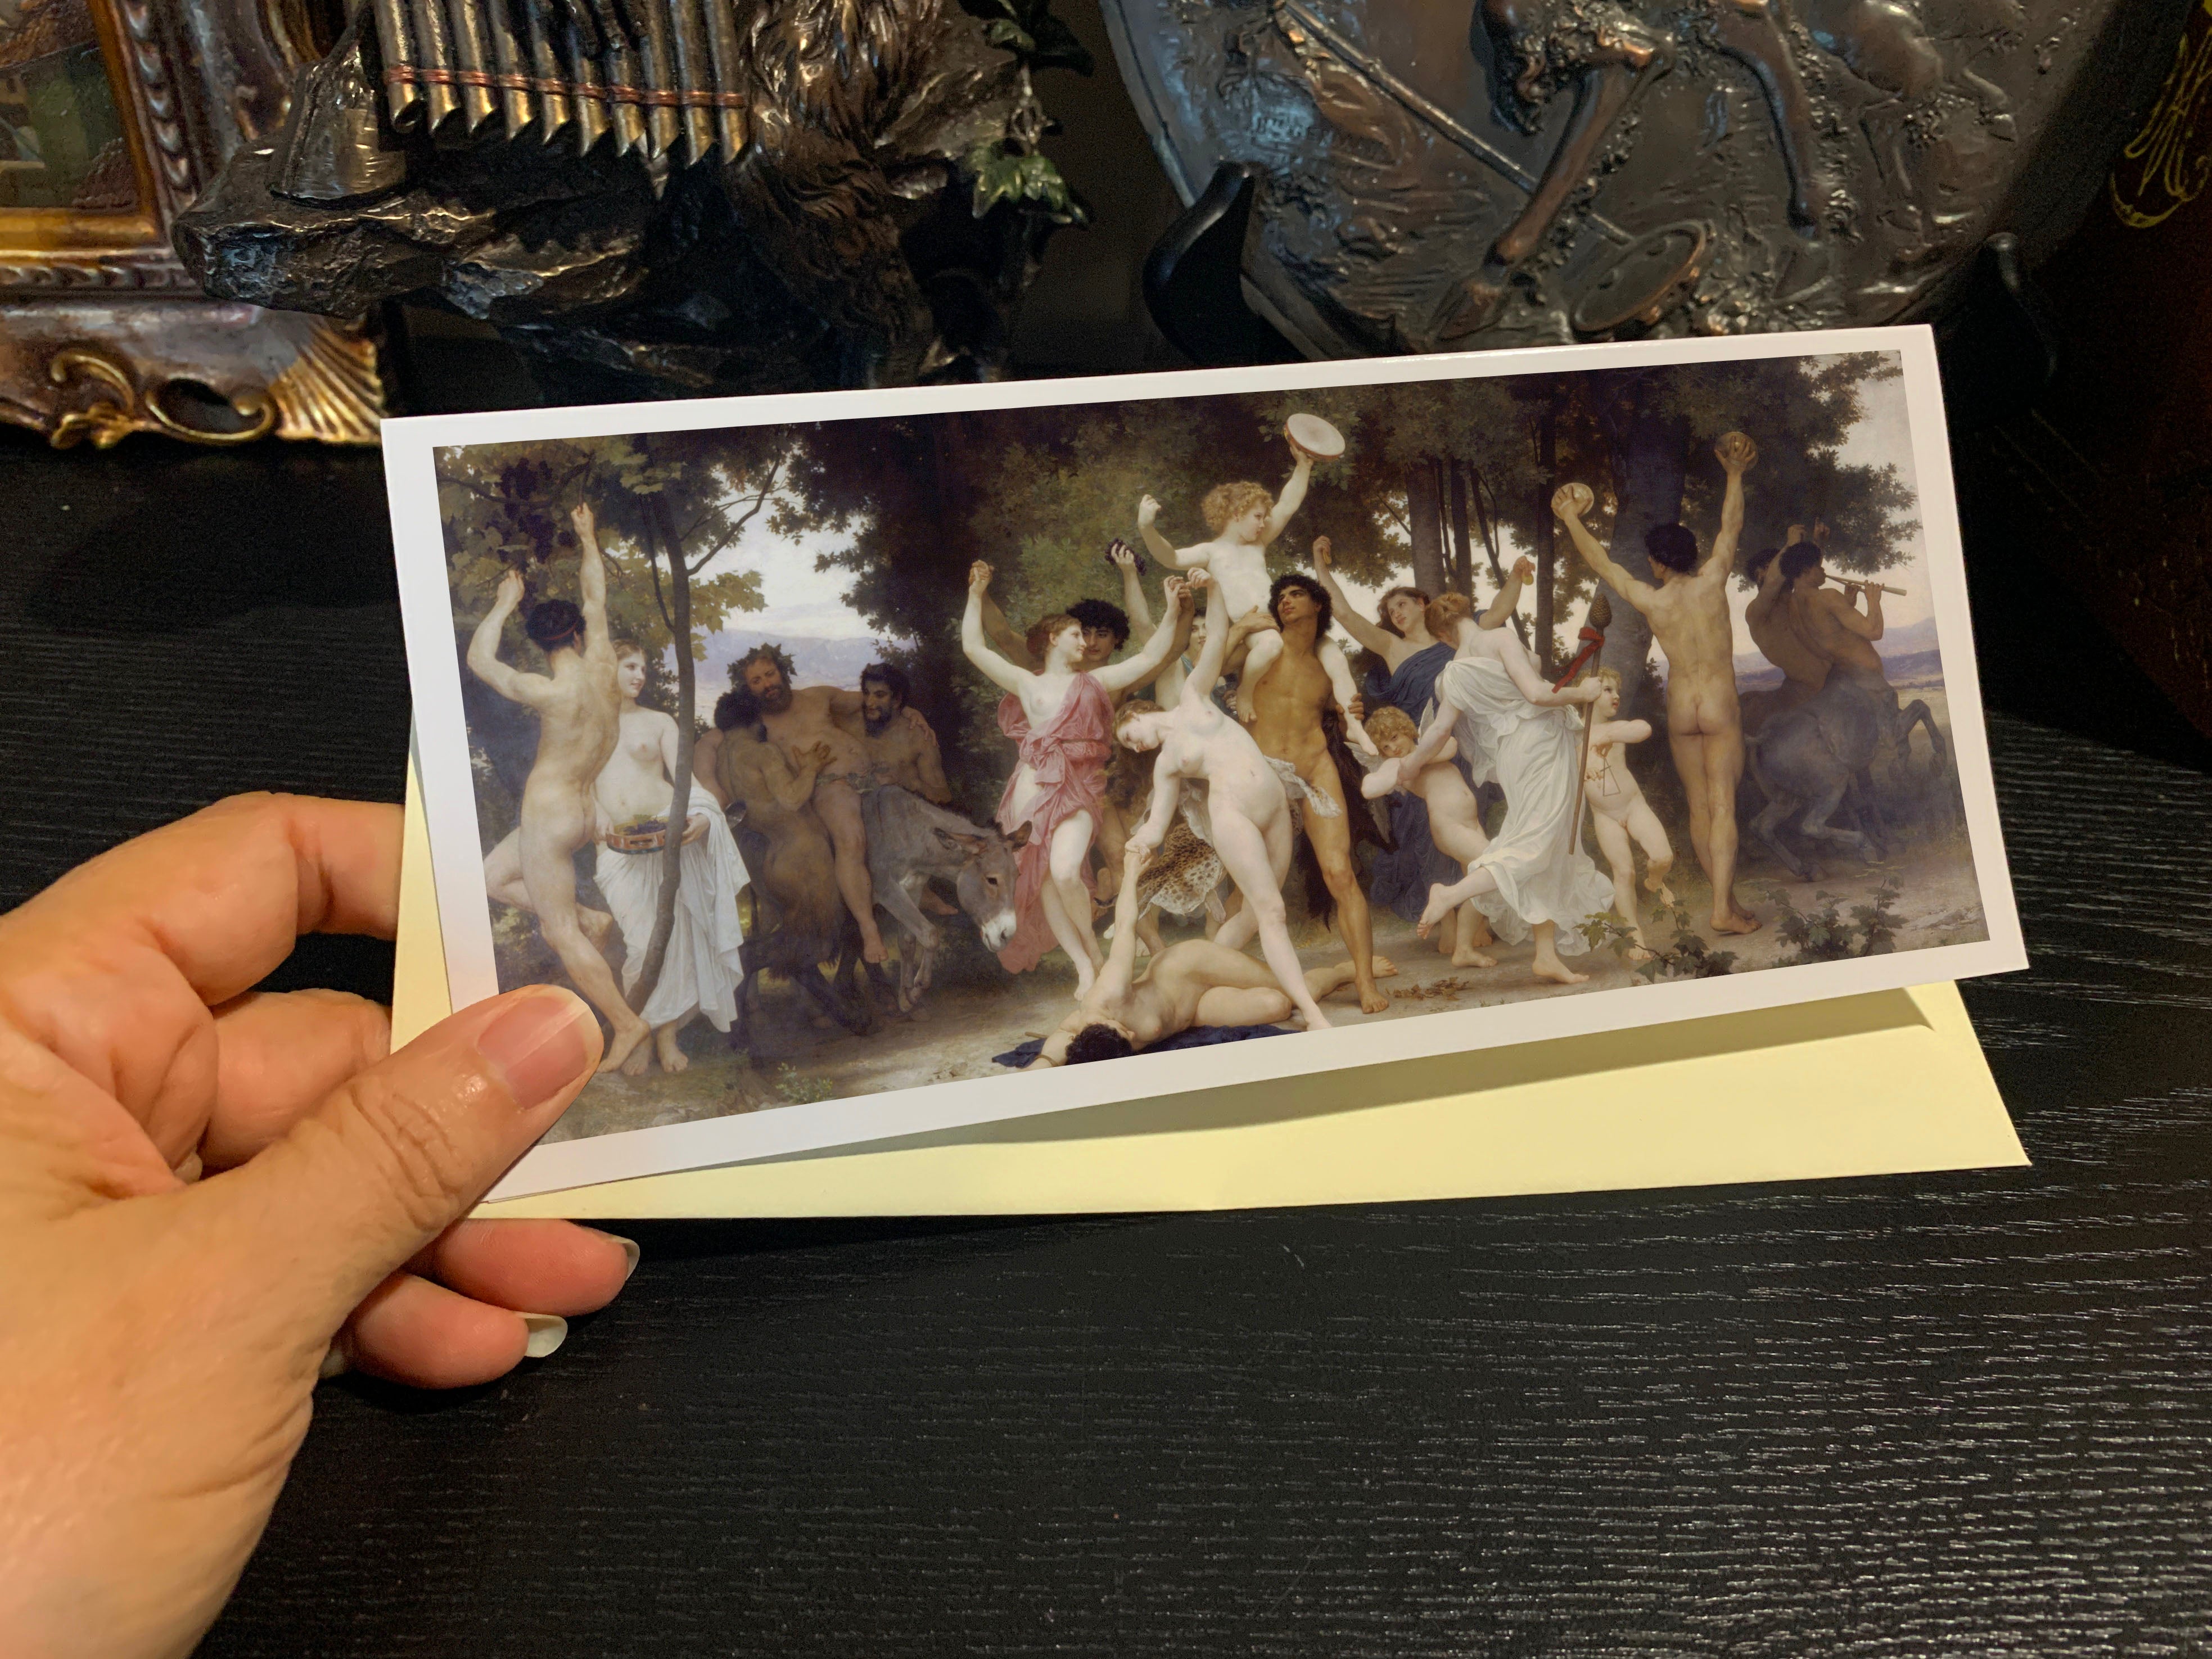 Youth of Bacchus by Adolphe William Bouguereau, Panoramic Greeting Card/Money Holder with Ivory Envelope